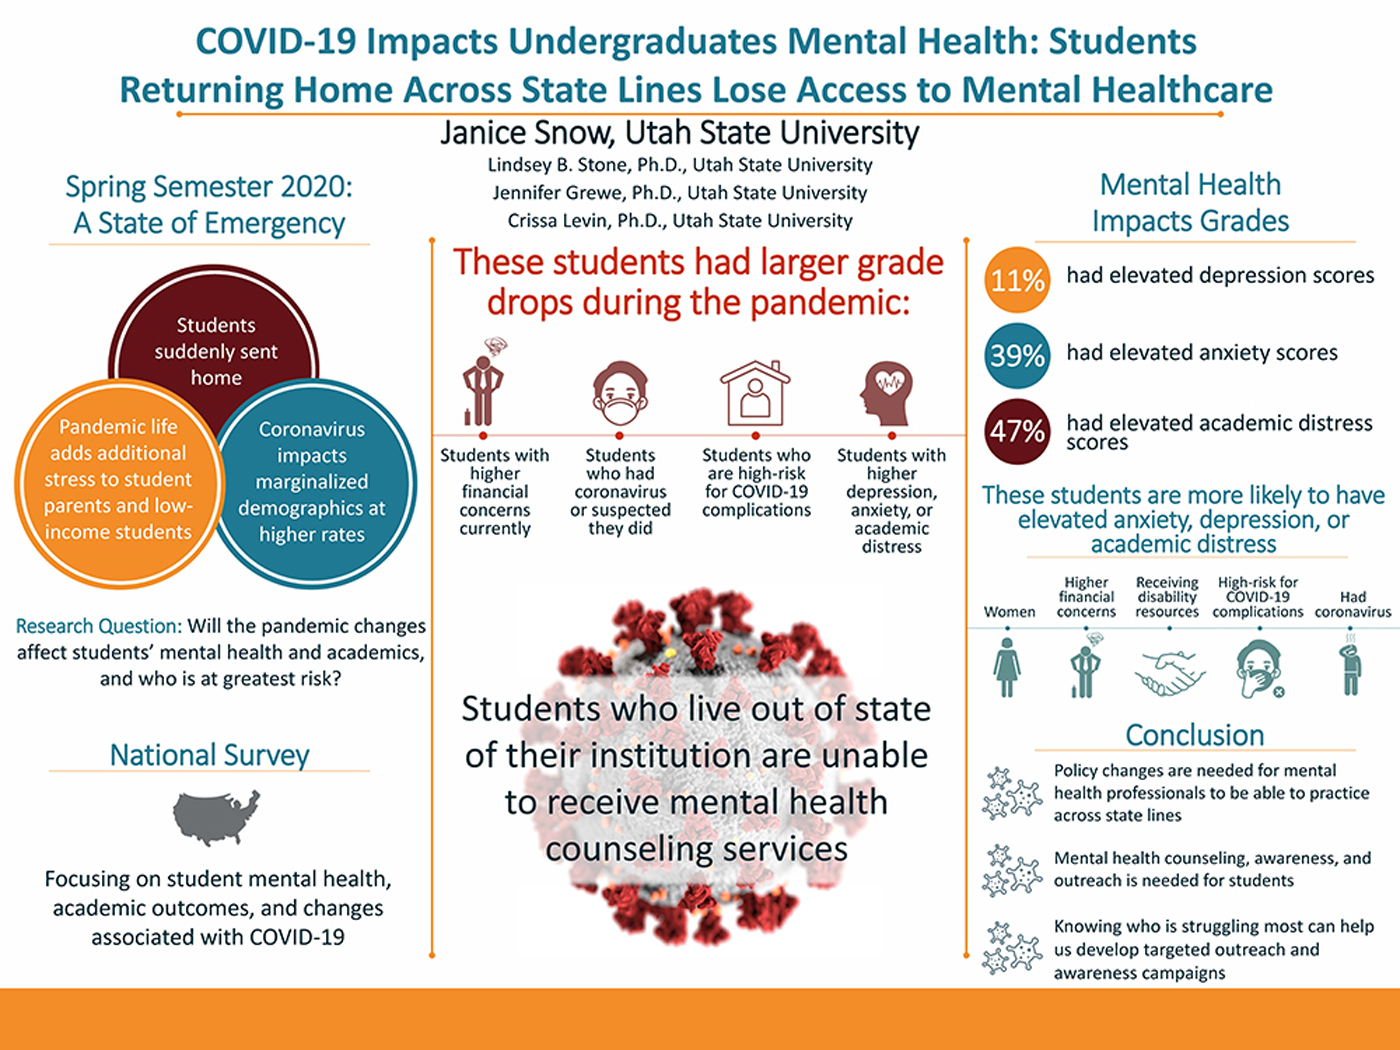 COVID-19 Impacts Undergraduates Mental Health: Students Returning Home Across State Lines Lose Access to Mental Healthcare